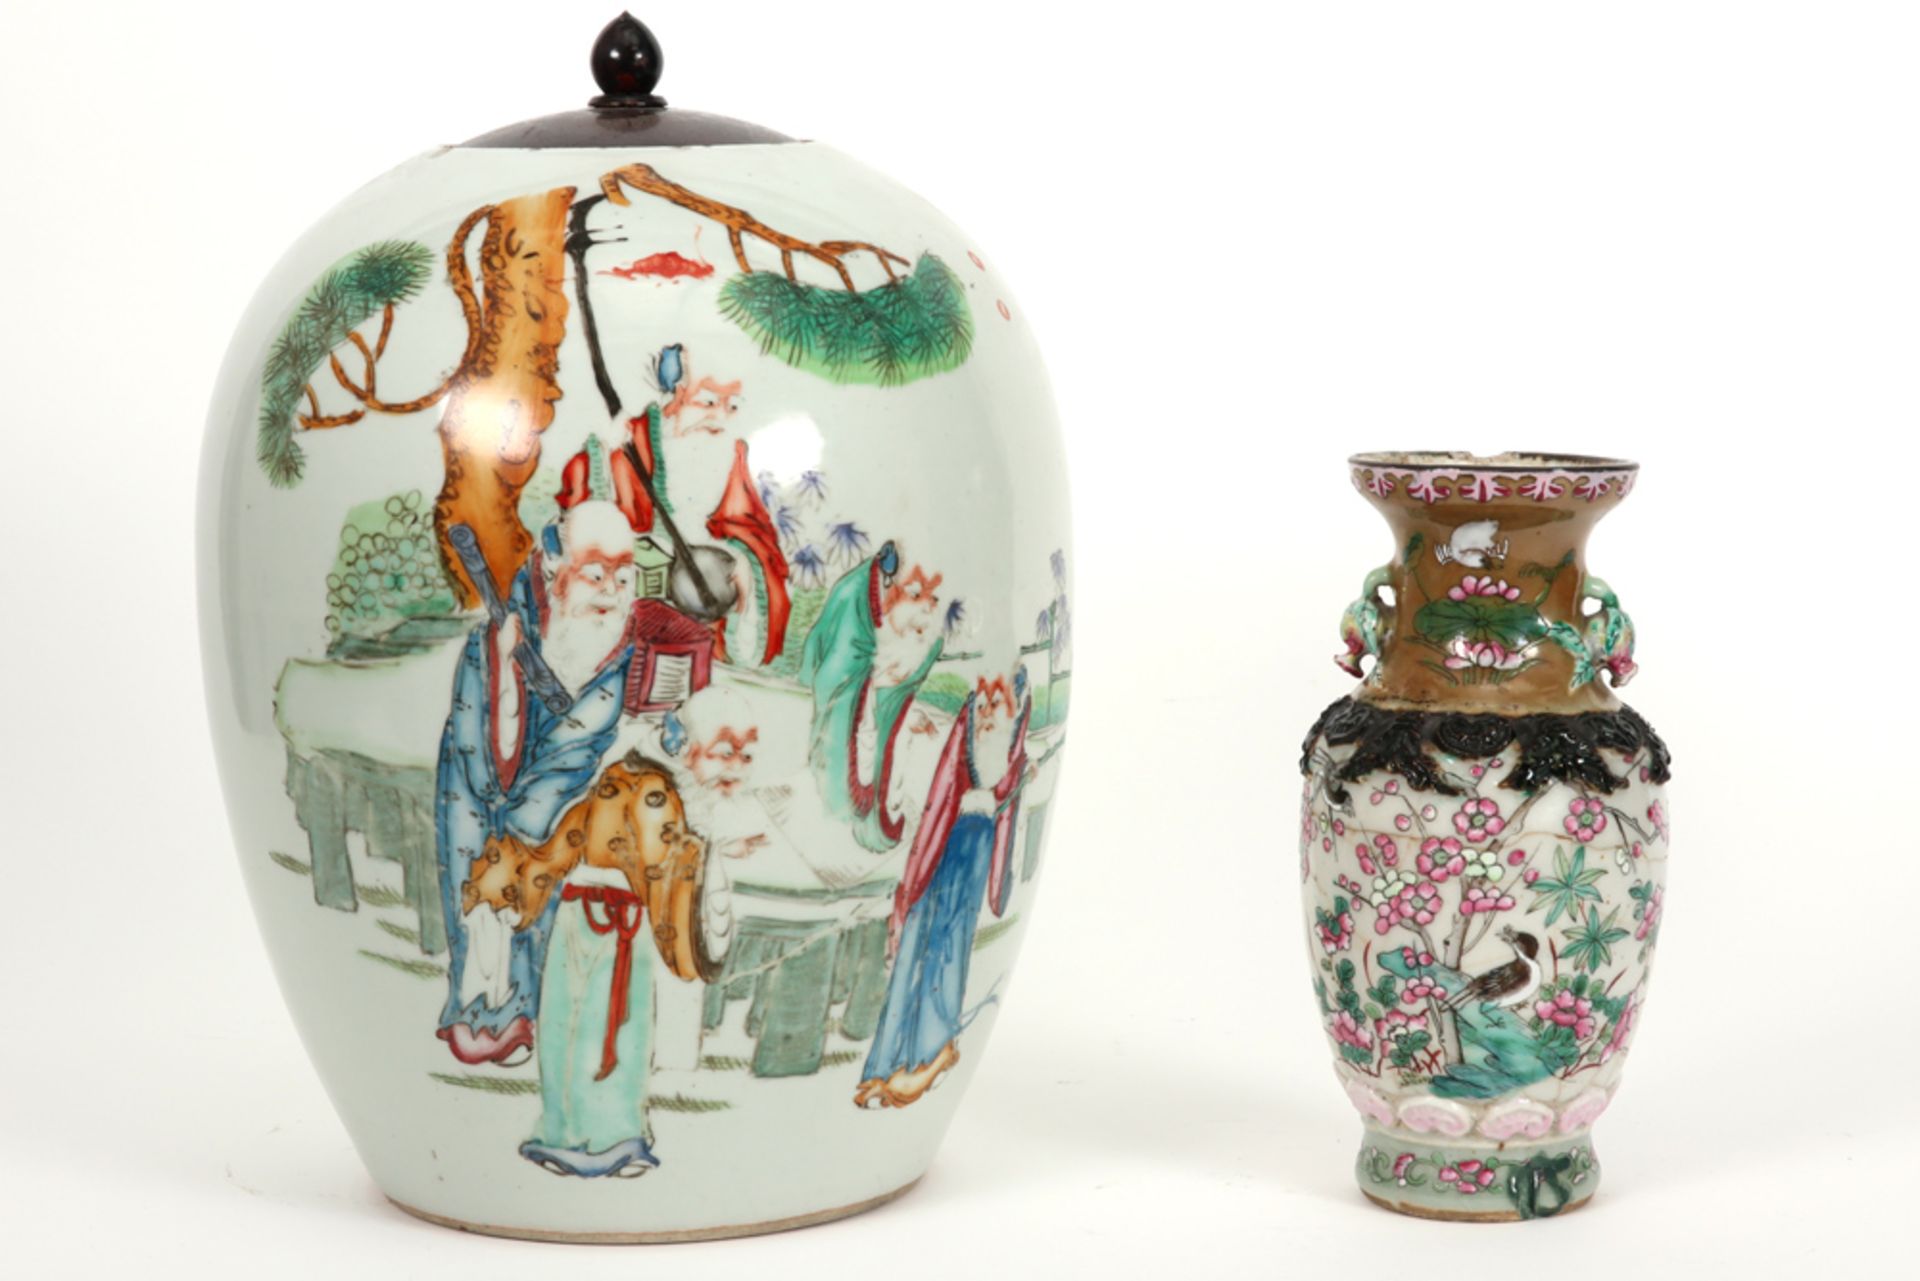 a small Nankin vase and a ginger jar (with wooden lid) in Chinese porcelain with polychrome